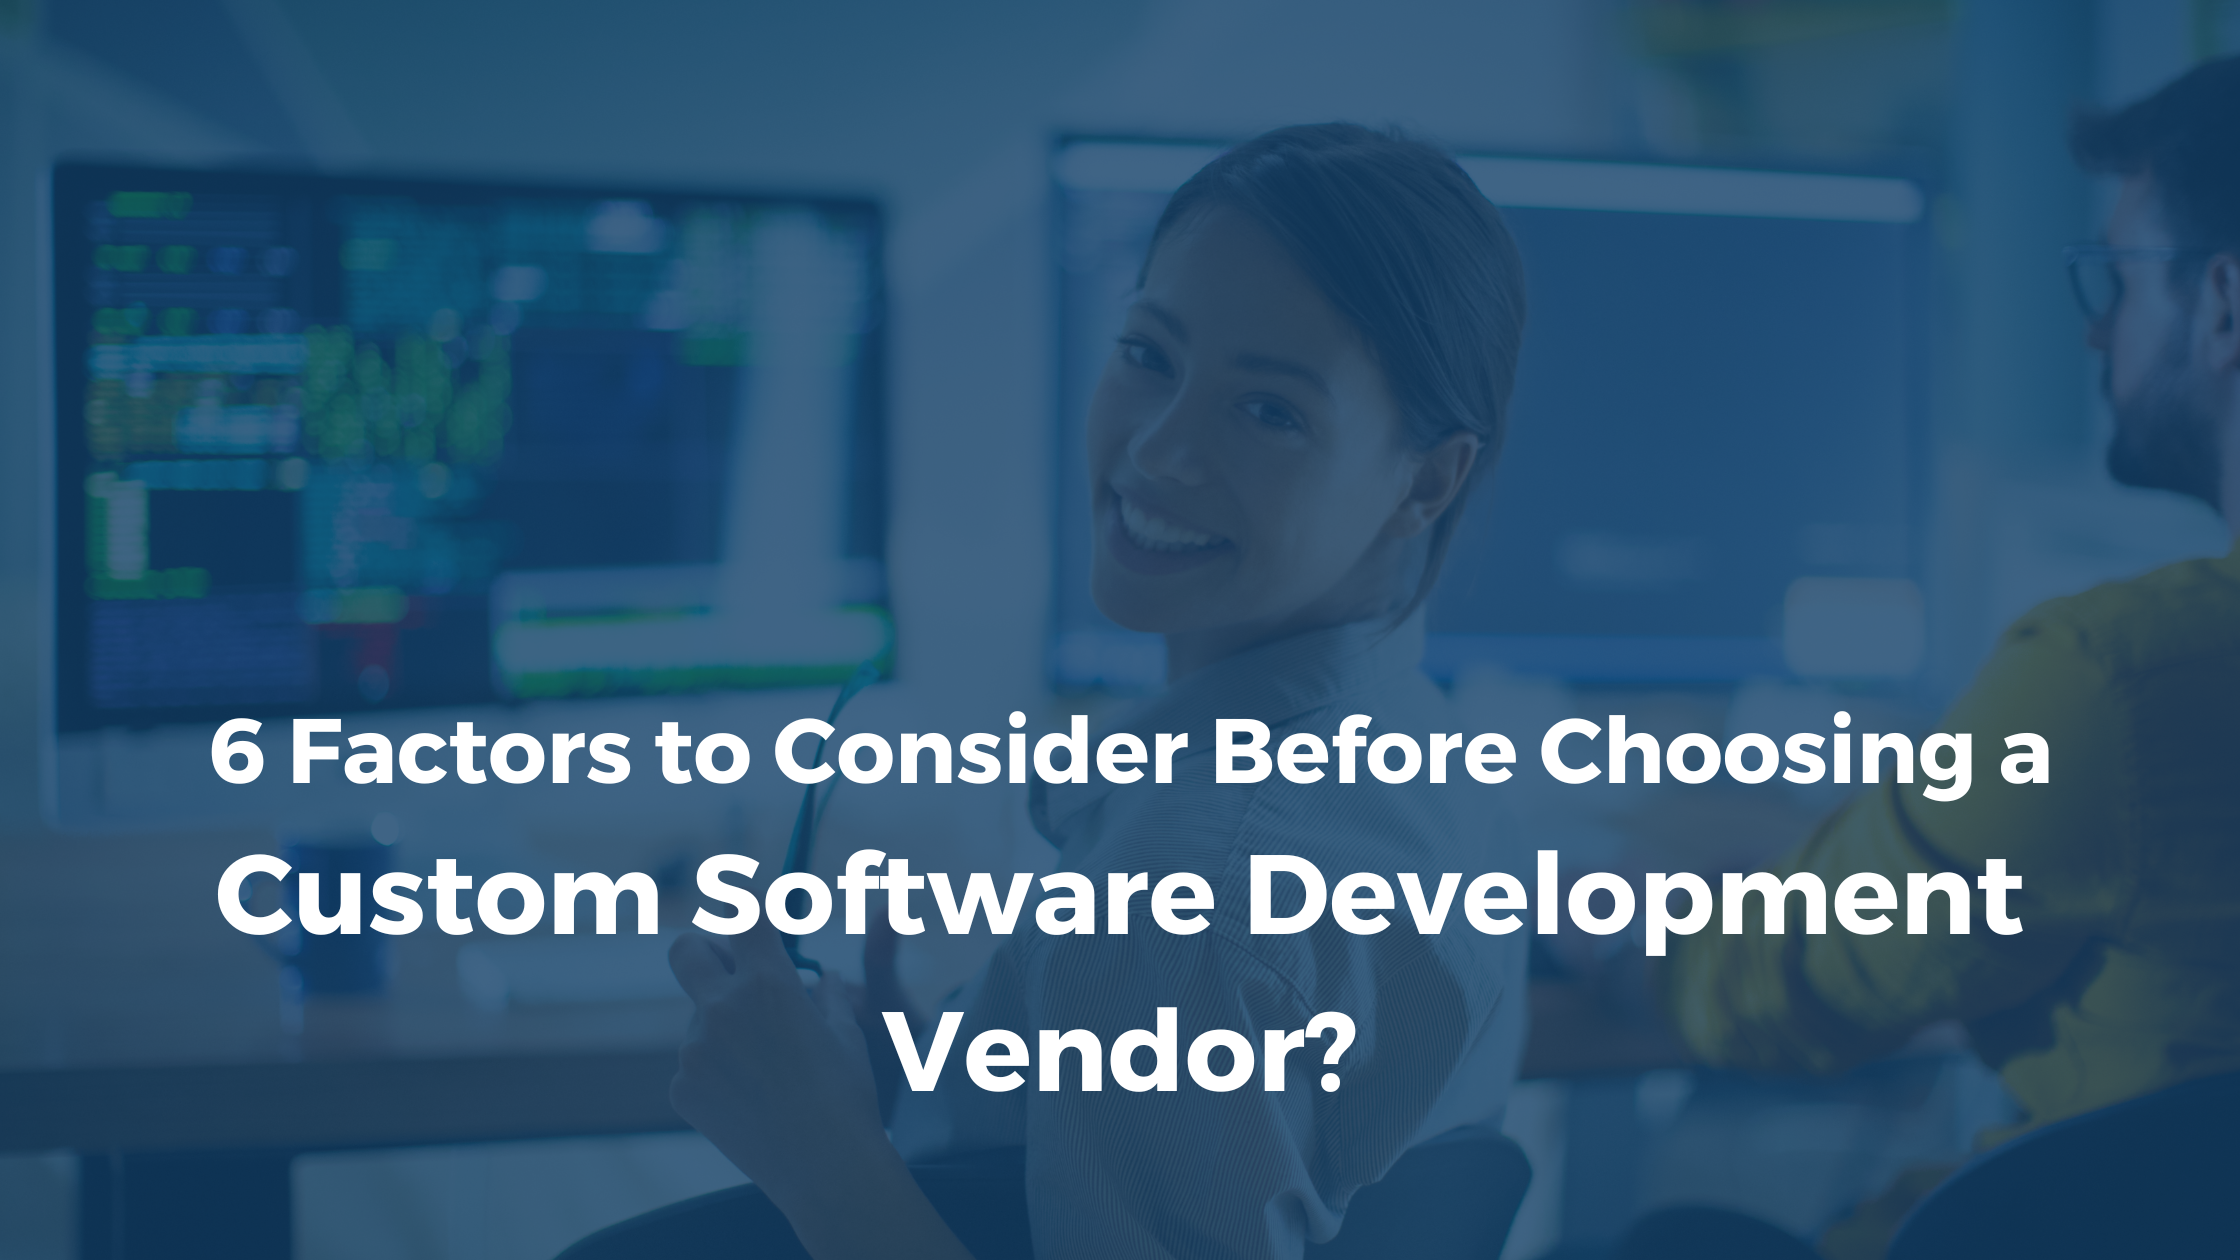 The image features six icons representing aspects like expertise, flexibility, scalability, security, cost, and support. It conveys the idea of a comprehensive guide, emphasizing the key factors businesses should consider when choosing custom software development services for optimal outcomes.